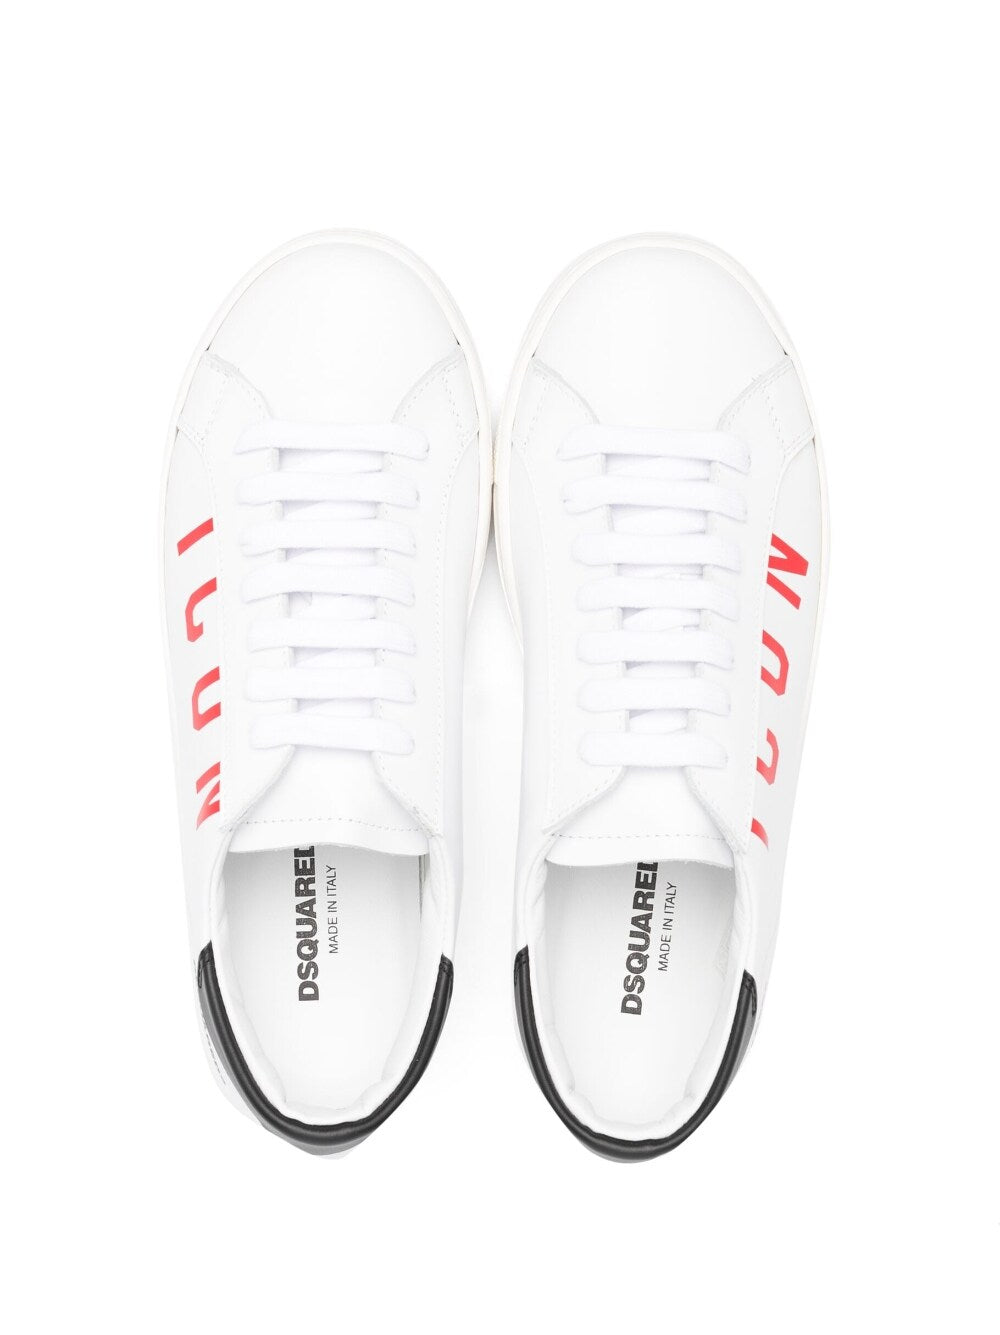 White sneakers for children with ICON print